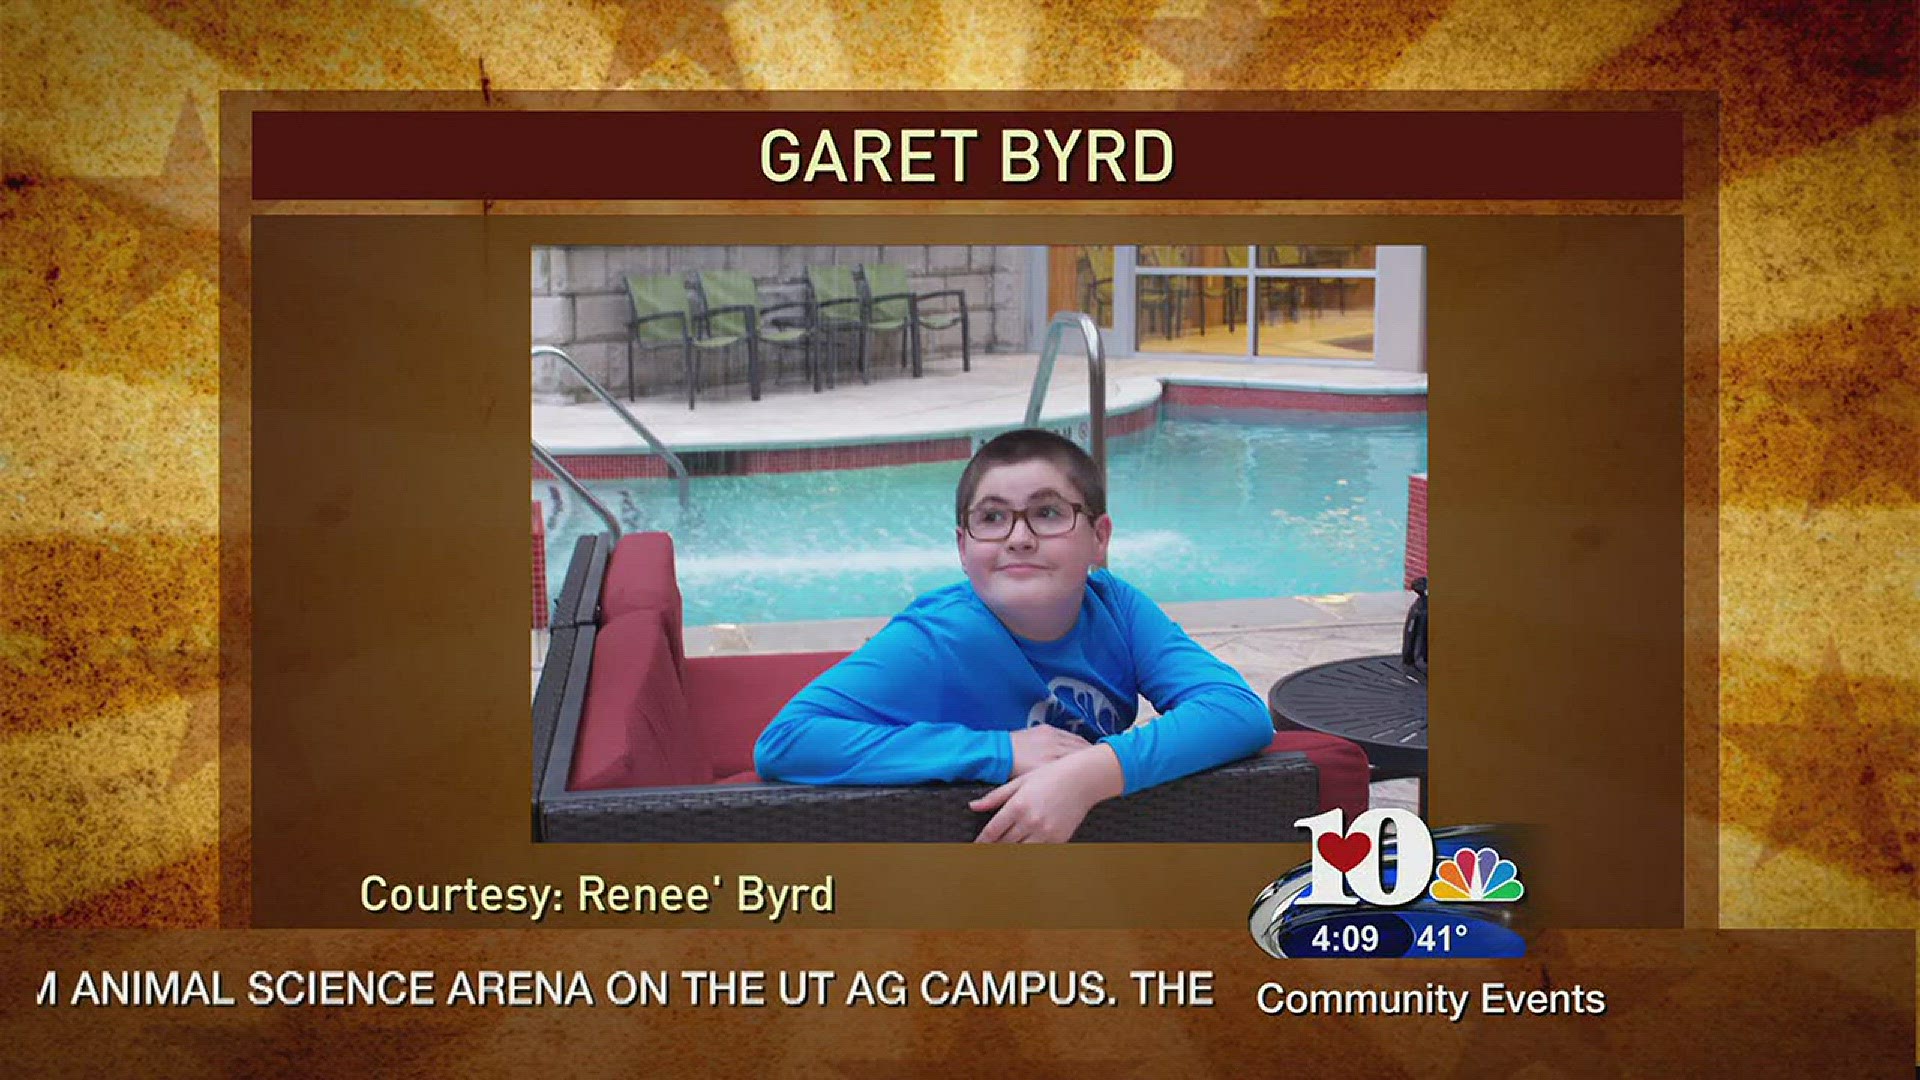 February 16, 2016Live at Five at 4Garet Byrd is an eleven year old, sixth grader who attends Fairview Elementary School in Scott County.